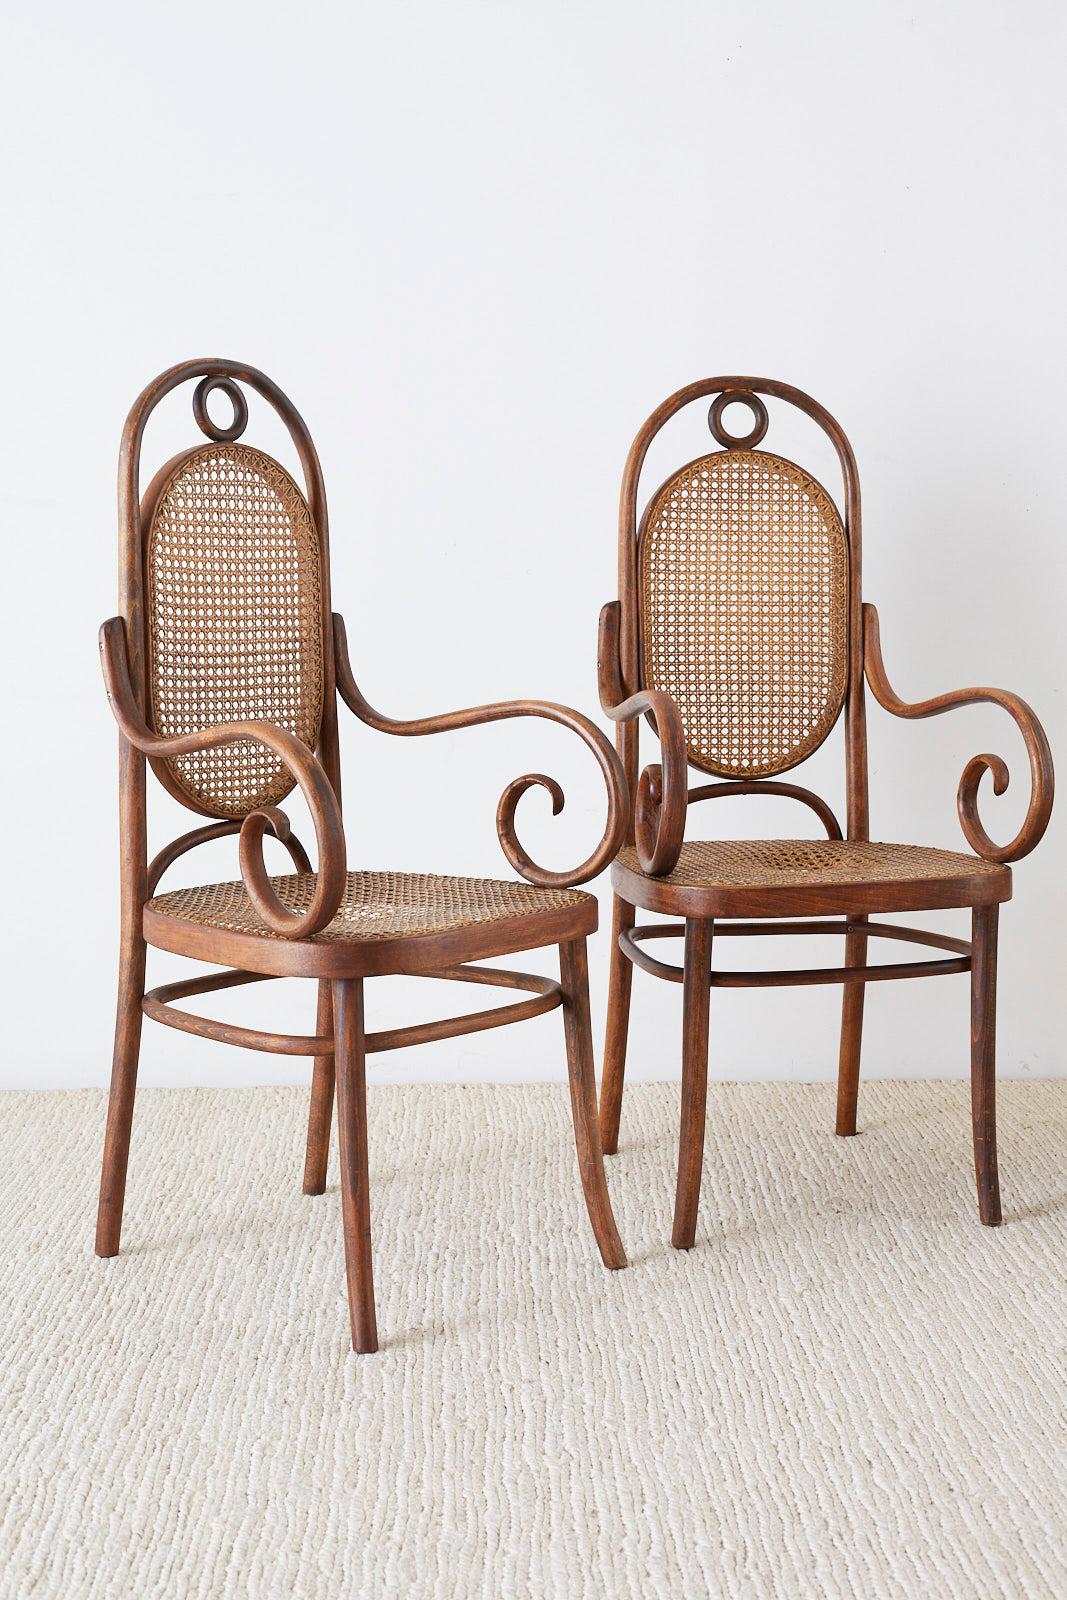 thonet bentwood cane chairs